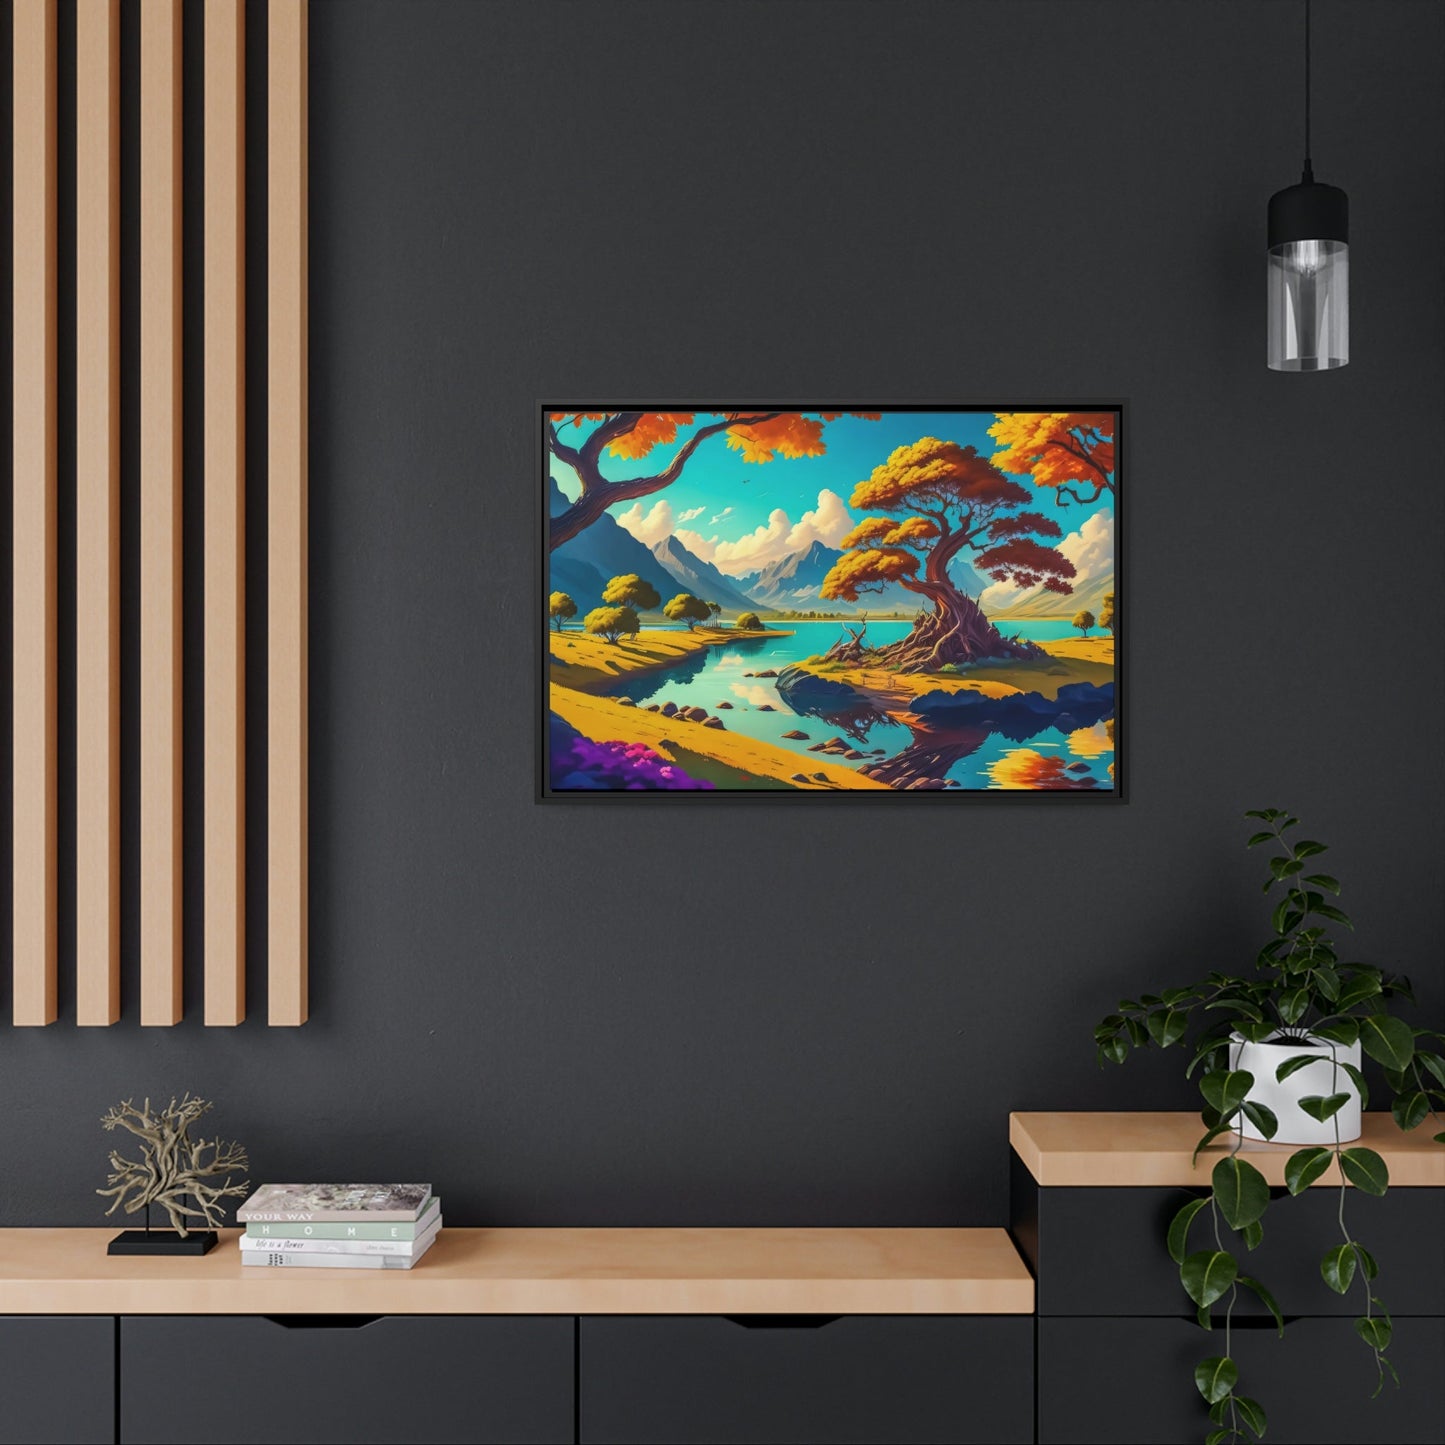 Nature's Aqua Palette: Artful Canvas and Poster Print of Lakes and Rivers